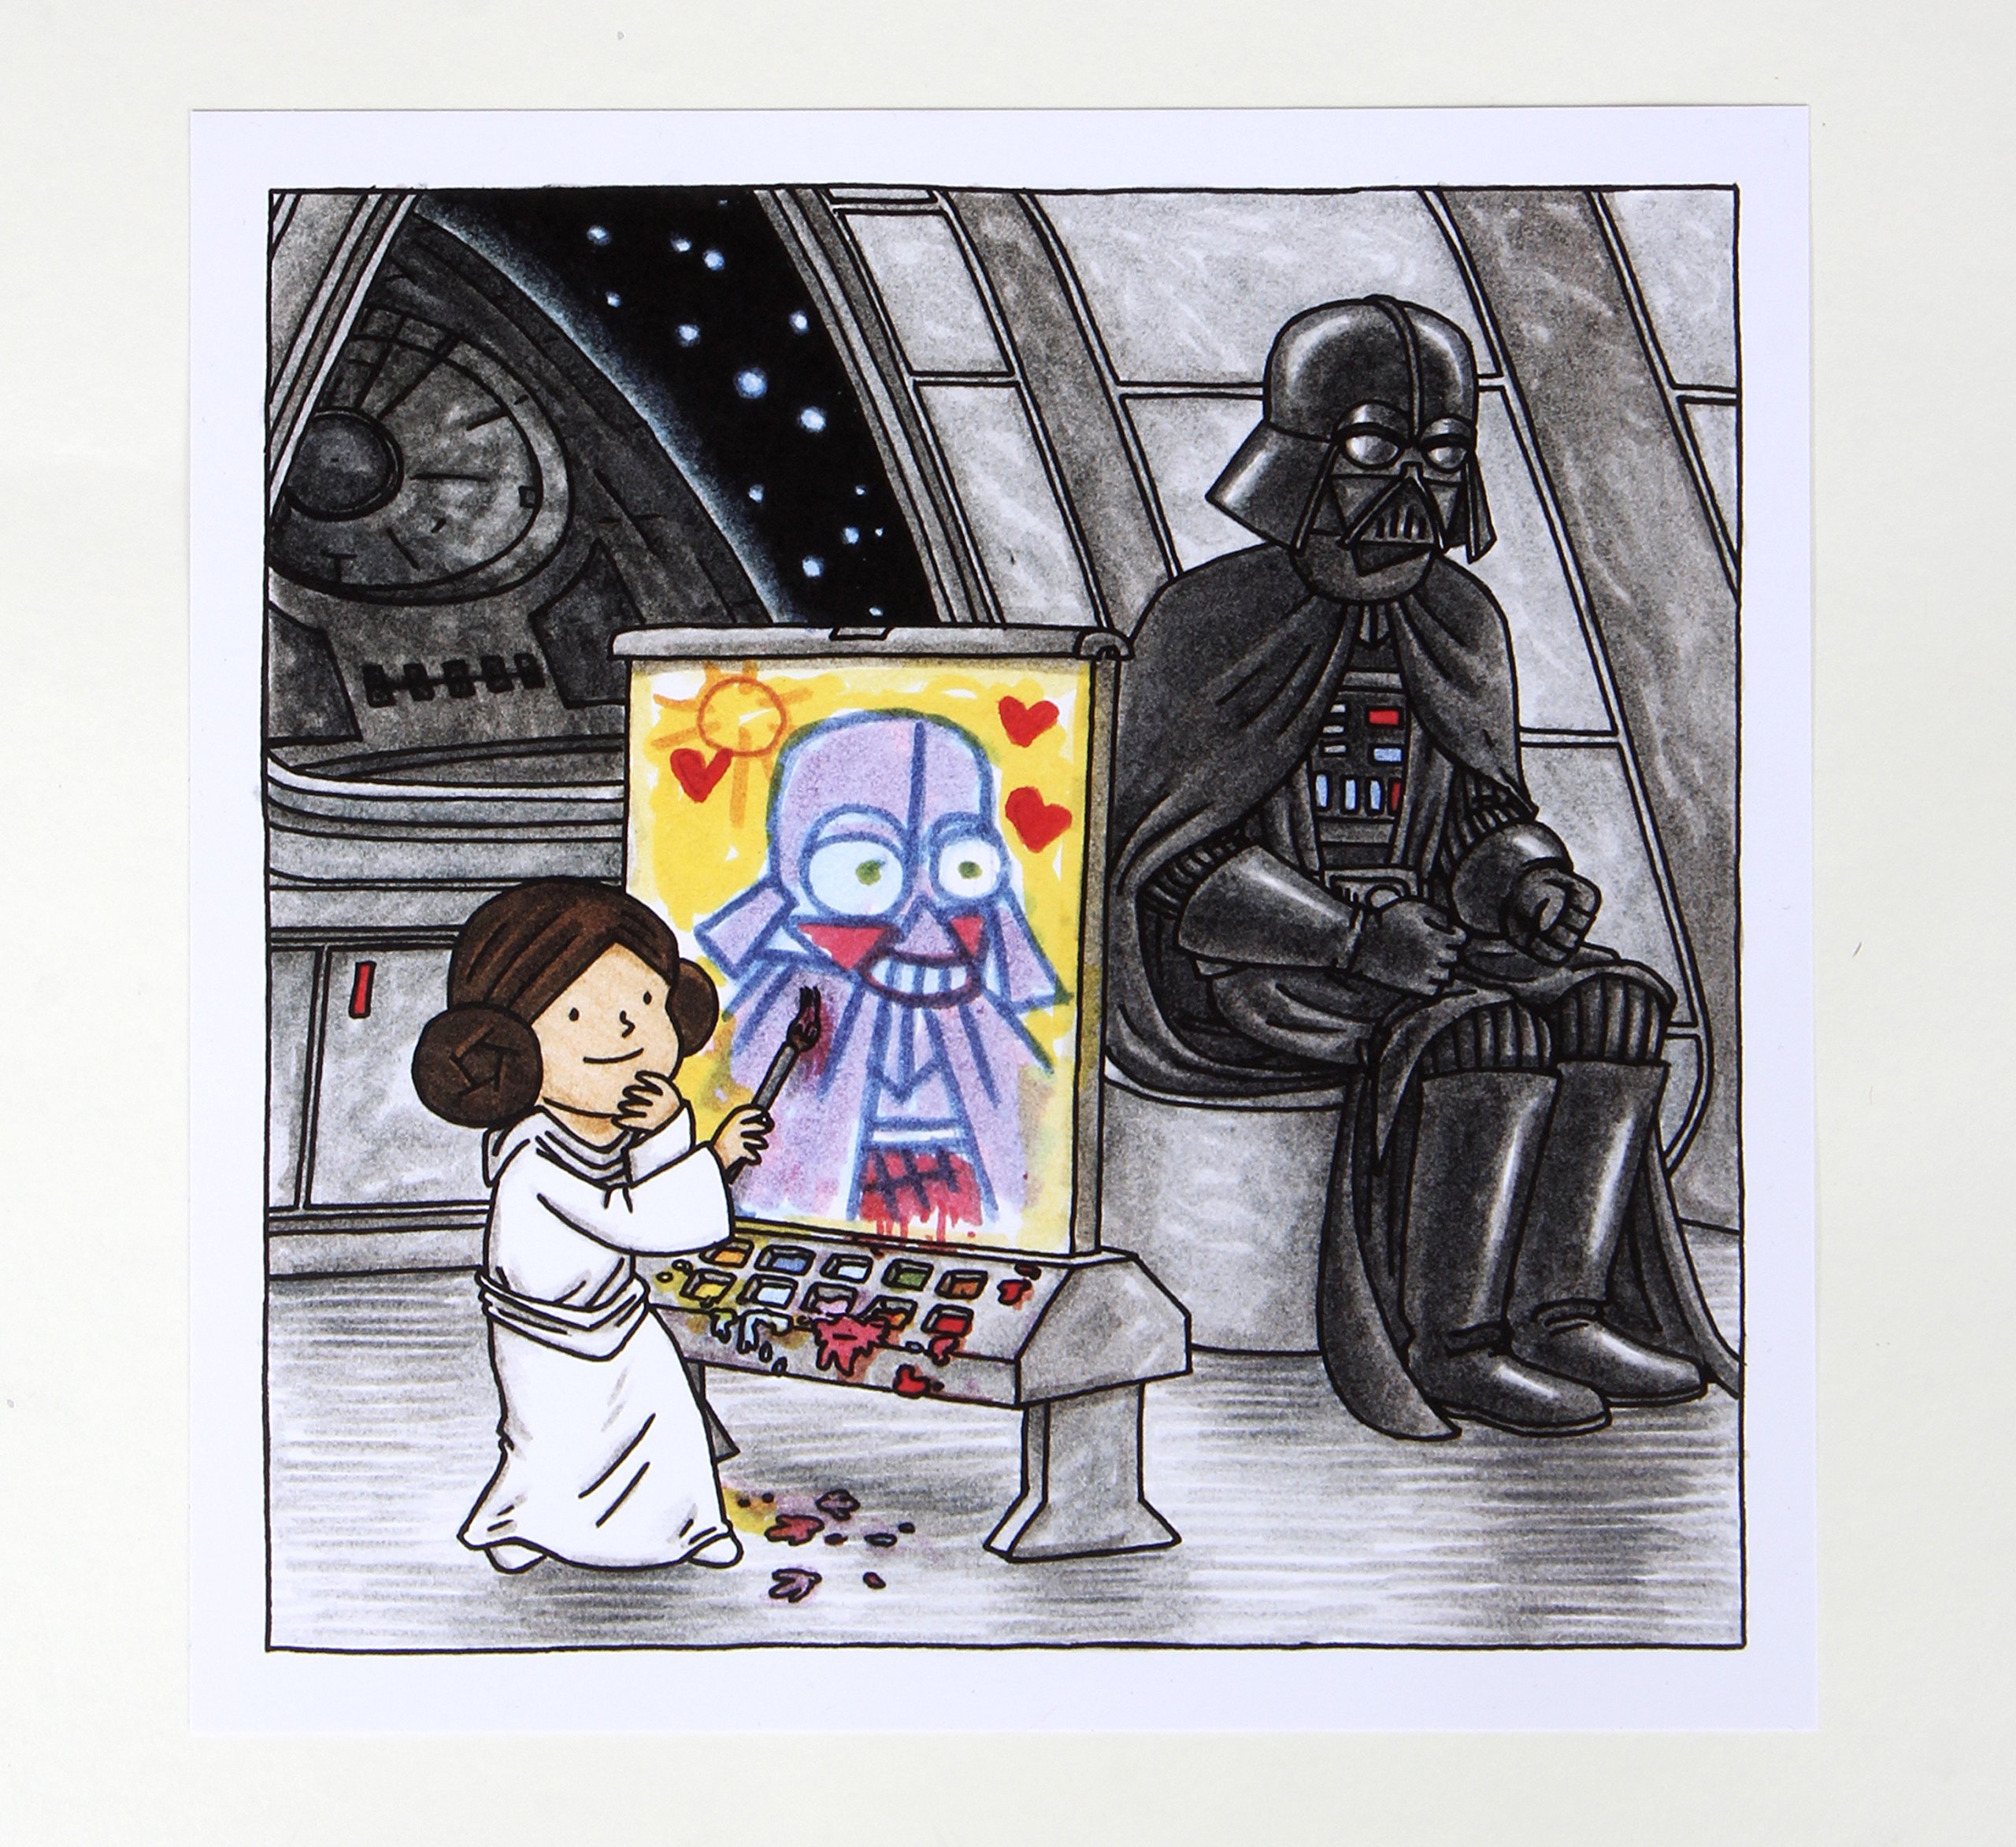 Darth Vader & Son / Vader's Little Princess Deluxe Box Set (includes two art prints) (Star Wars): (Star Wars Kids Books, Star Wars Children's Books, ... Gifts for Kids) (Star Wars x Chronicle Books)